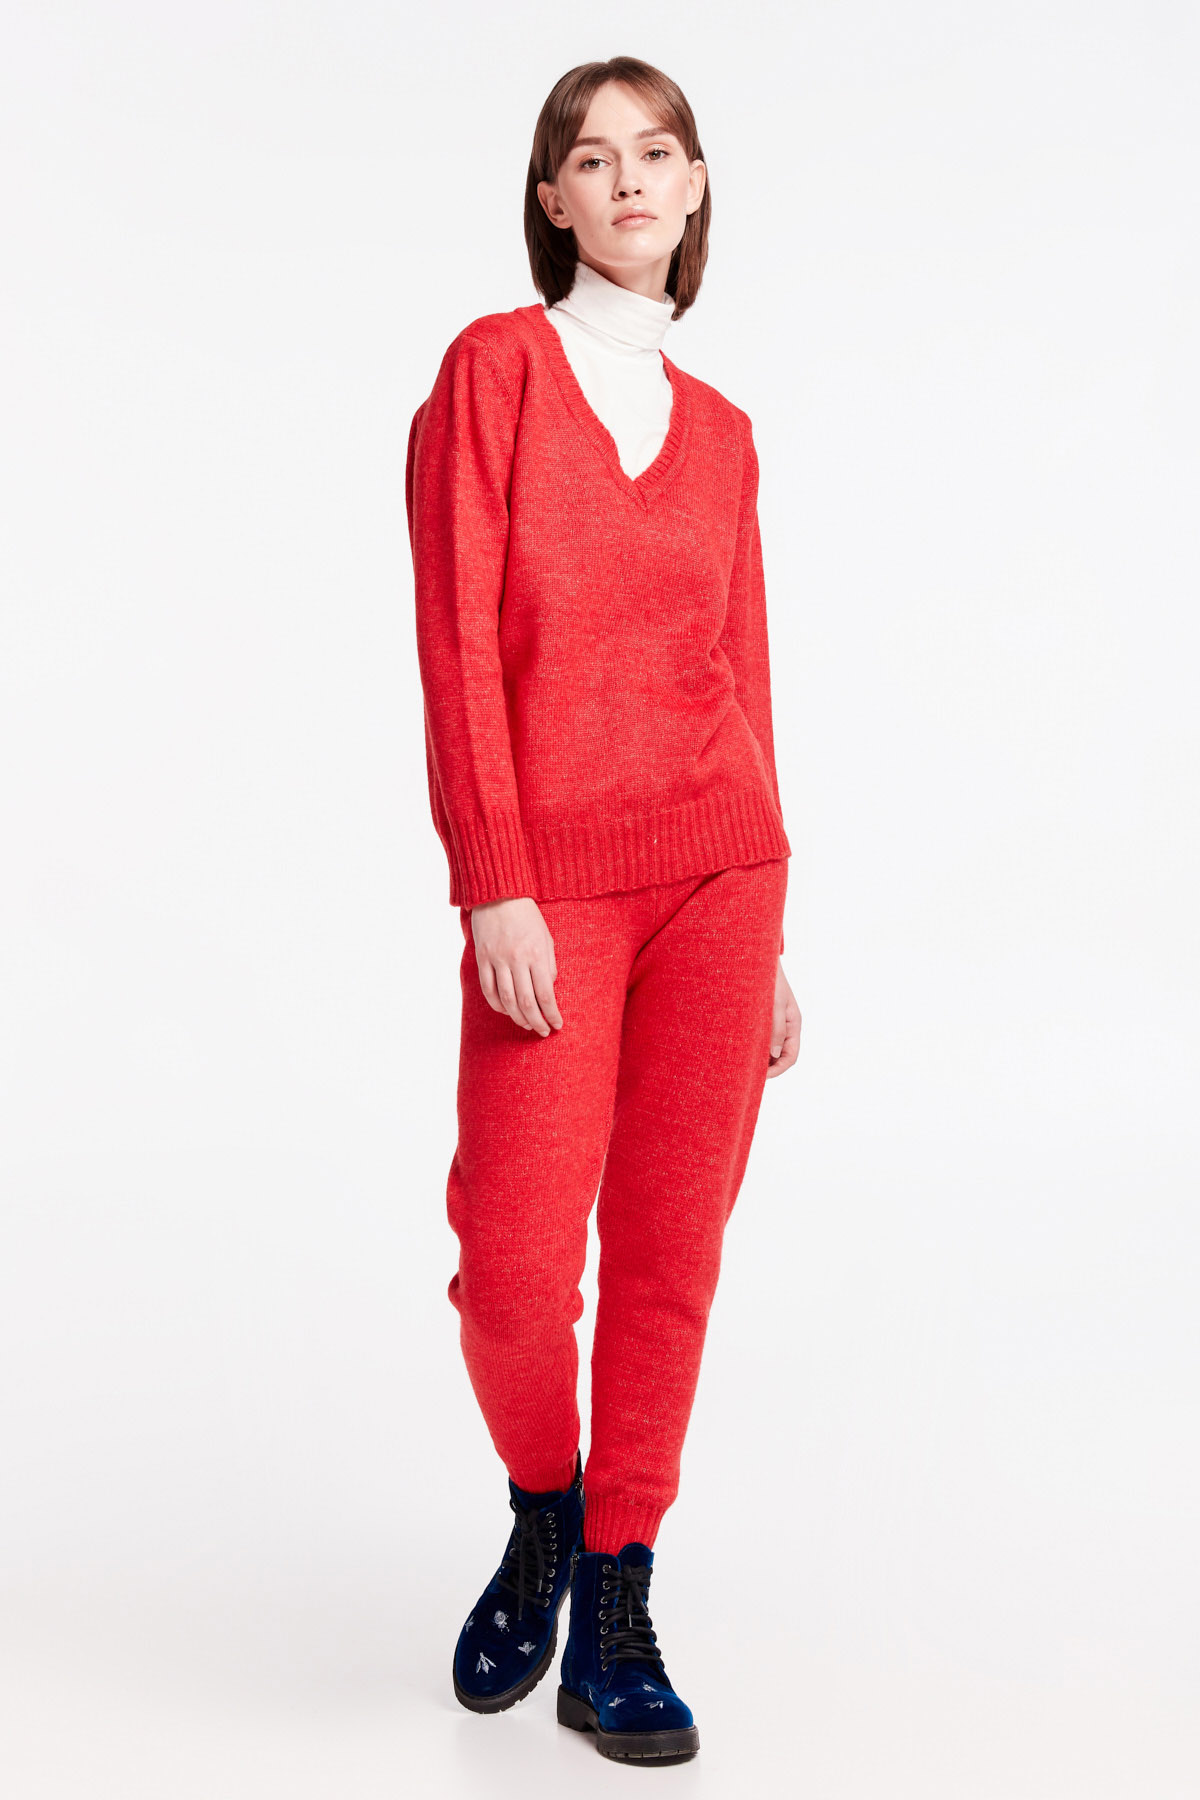 Red V-neck sweater, photo 8